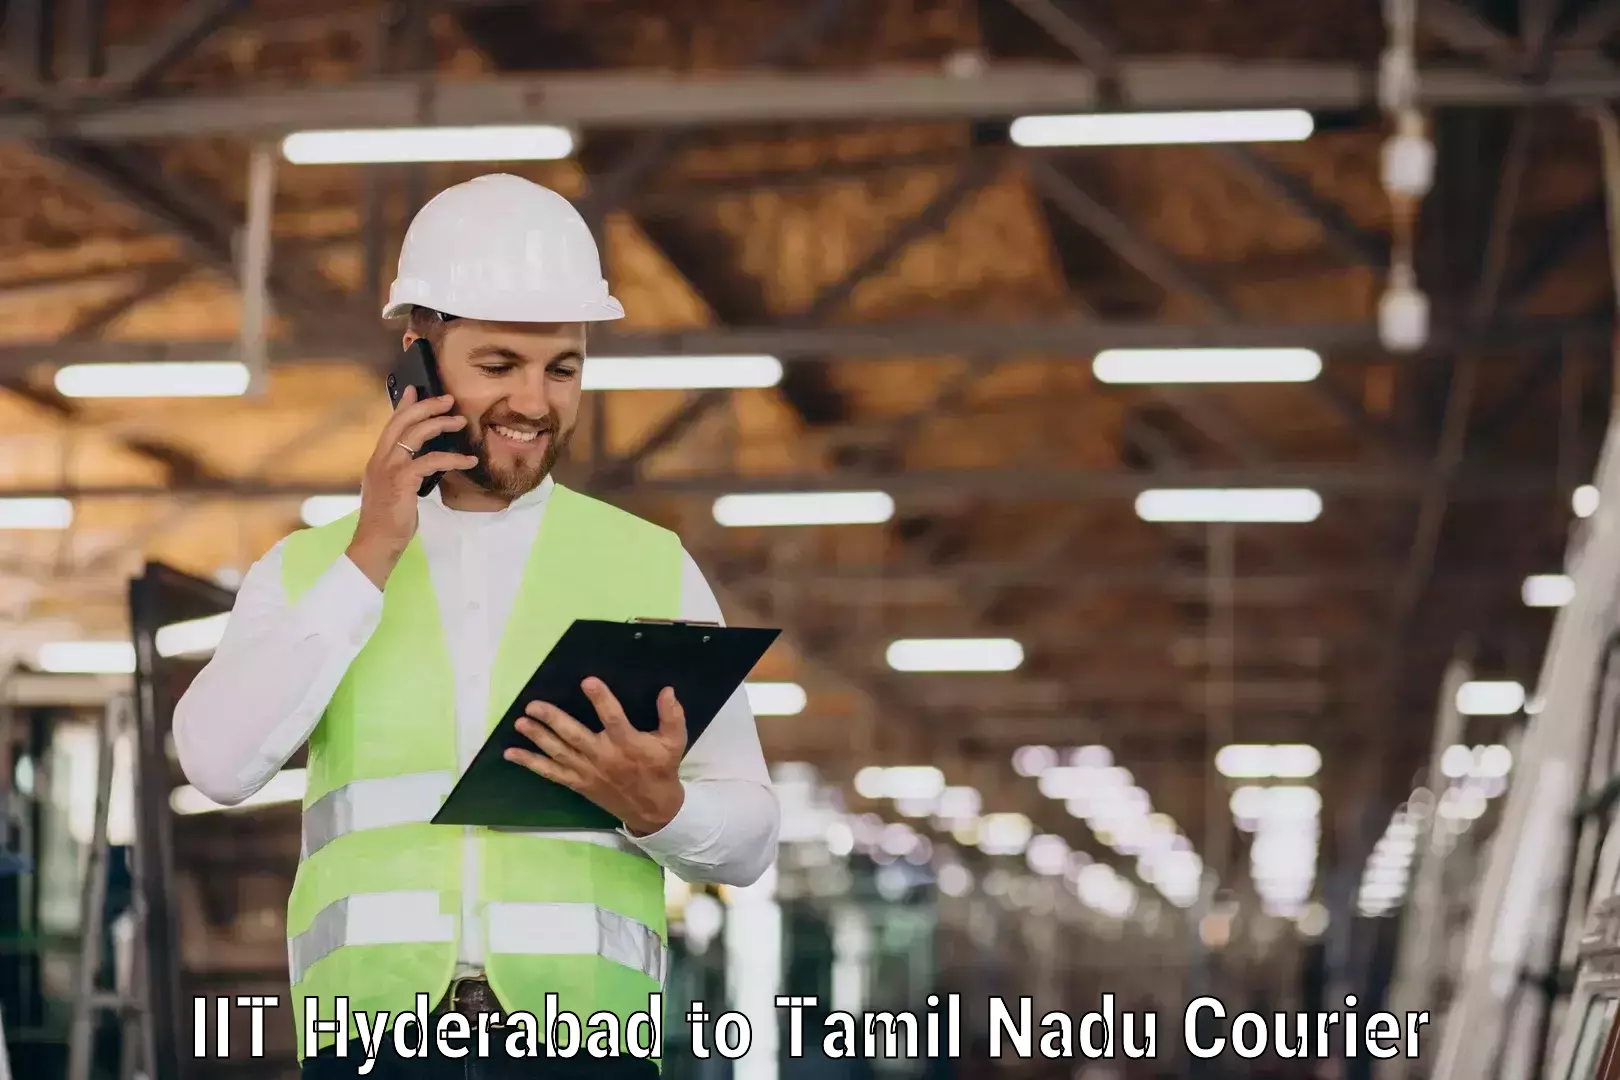 Local delivery service IIT Hyderabad to Nagapattinam